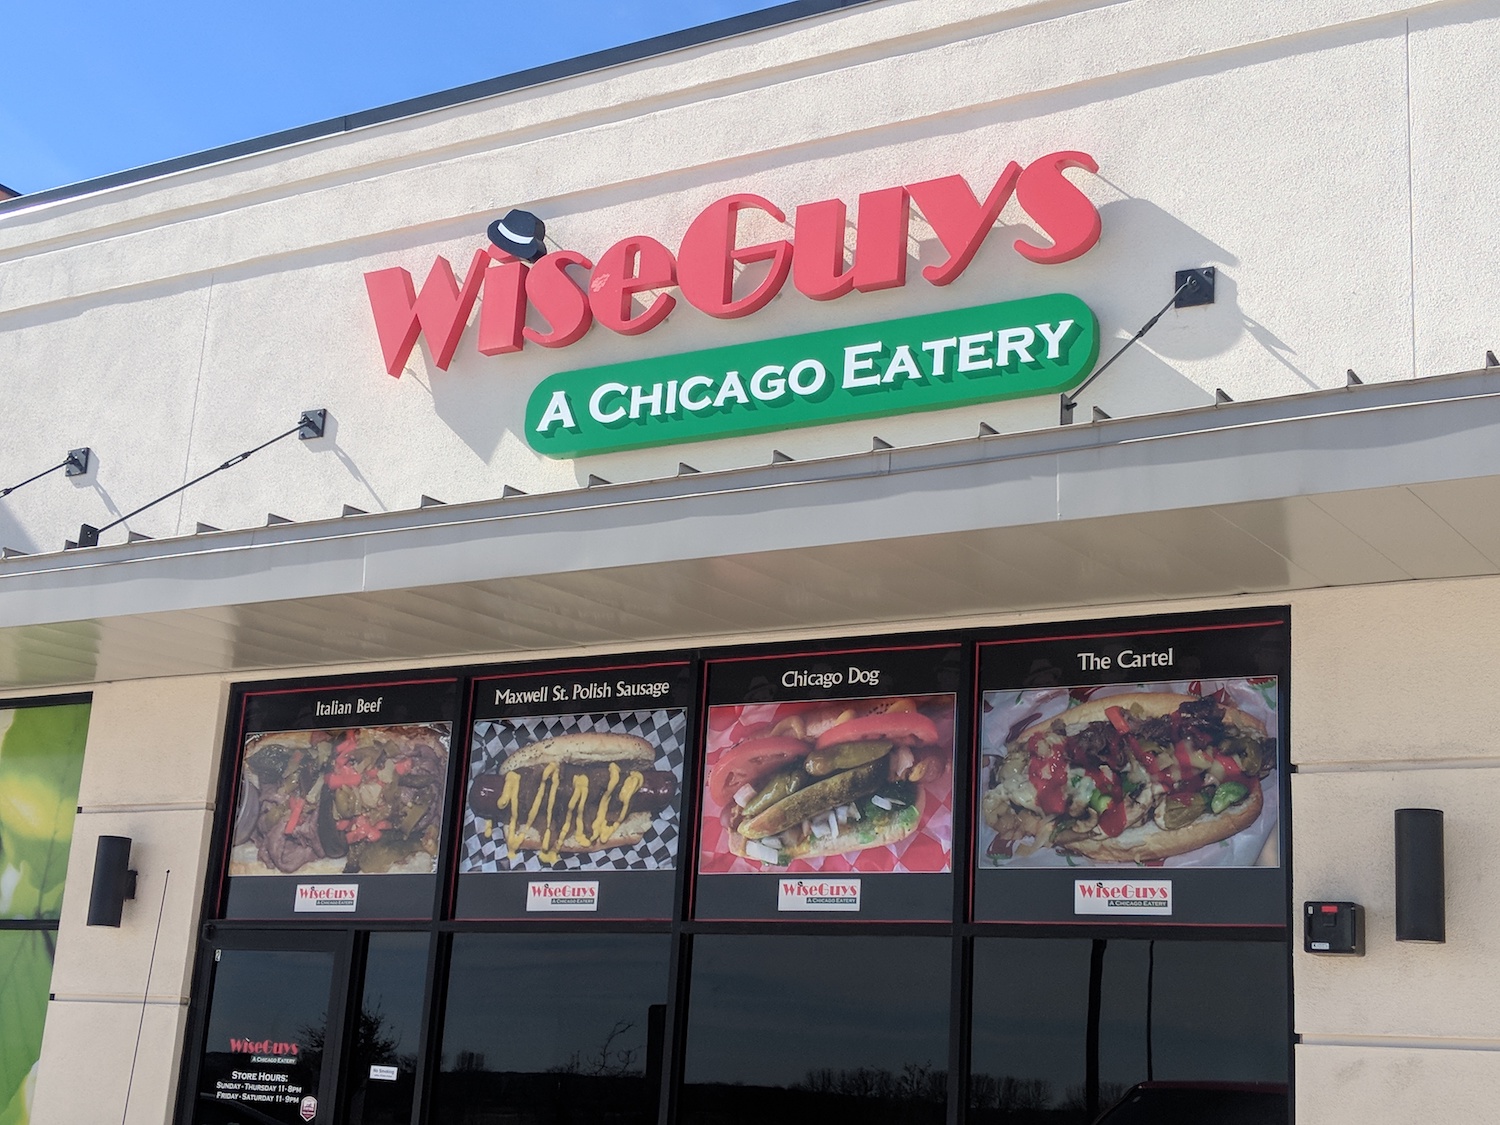 WiseGuys A Chicago Eatery-Round Rock